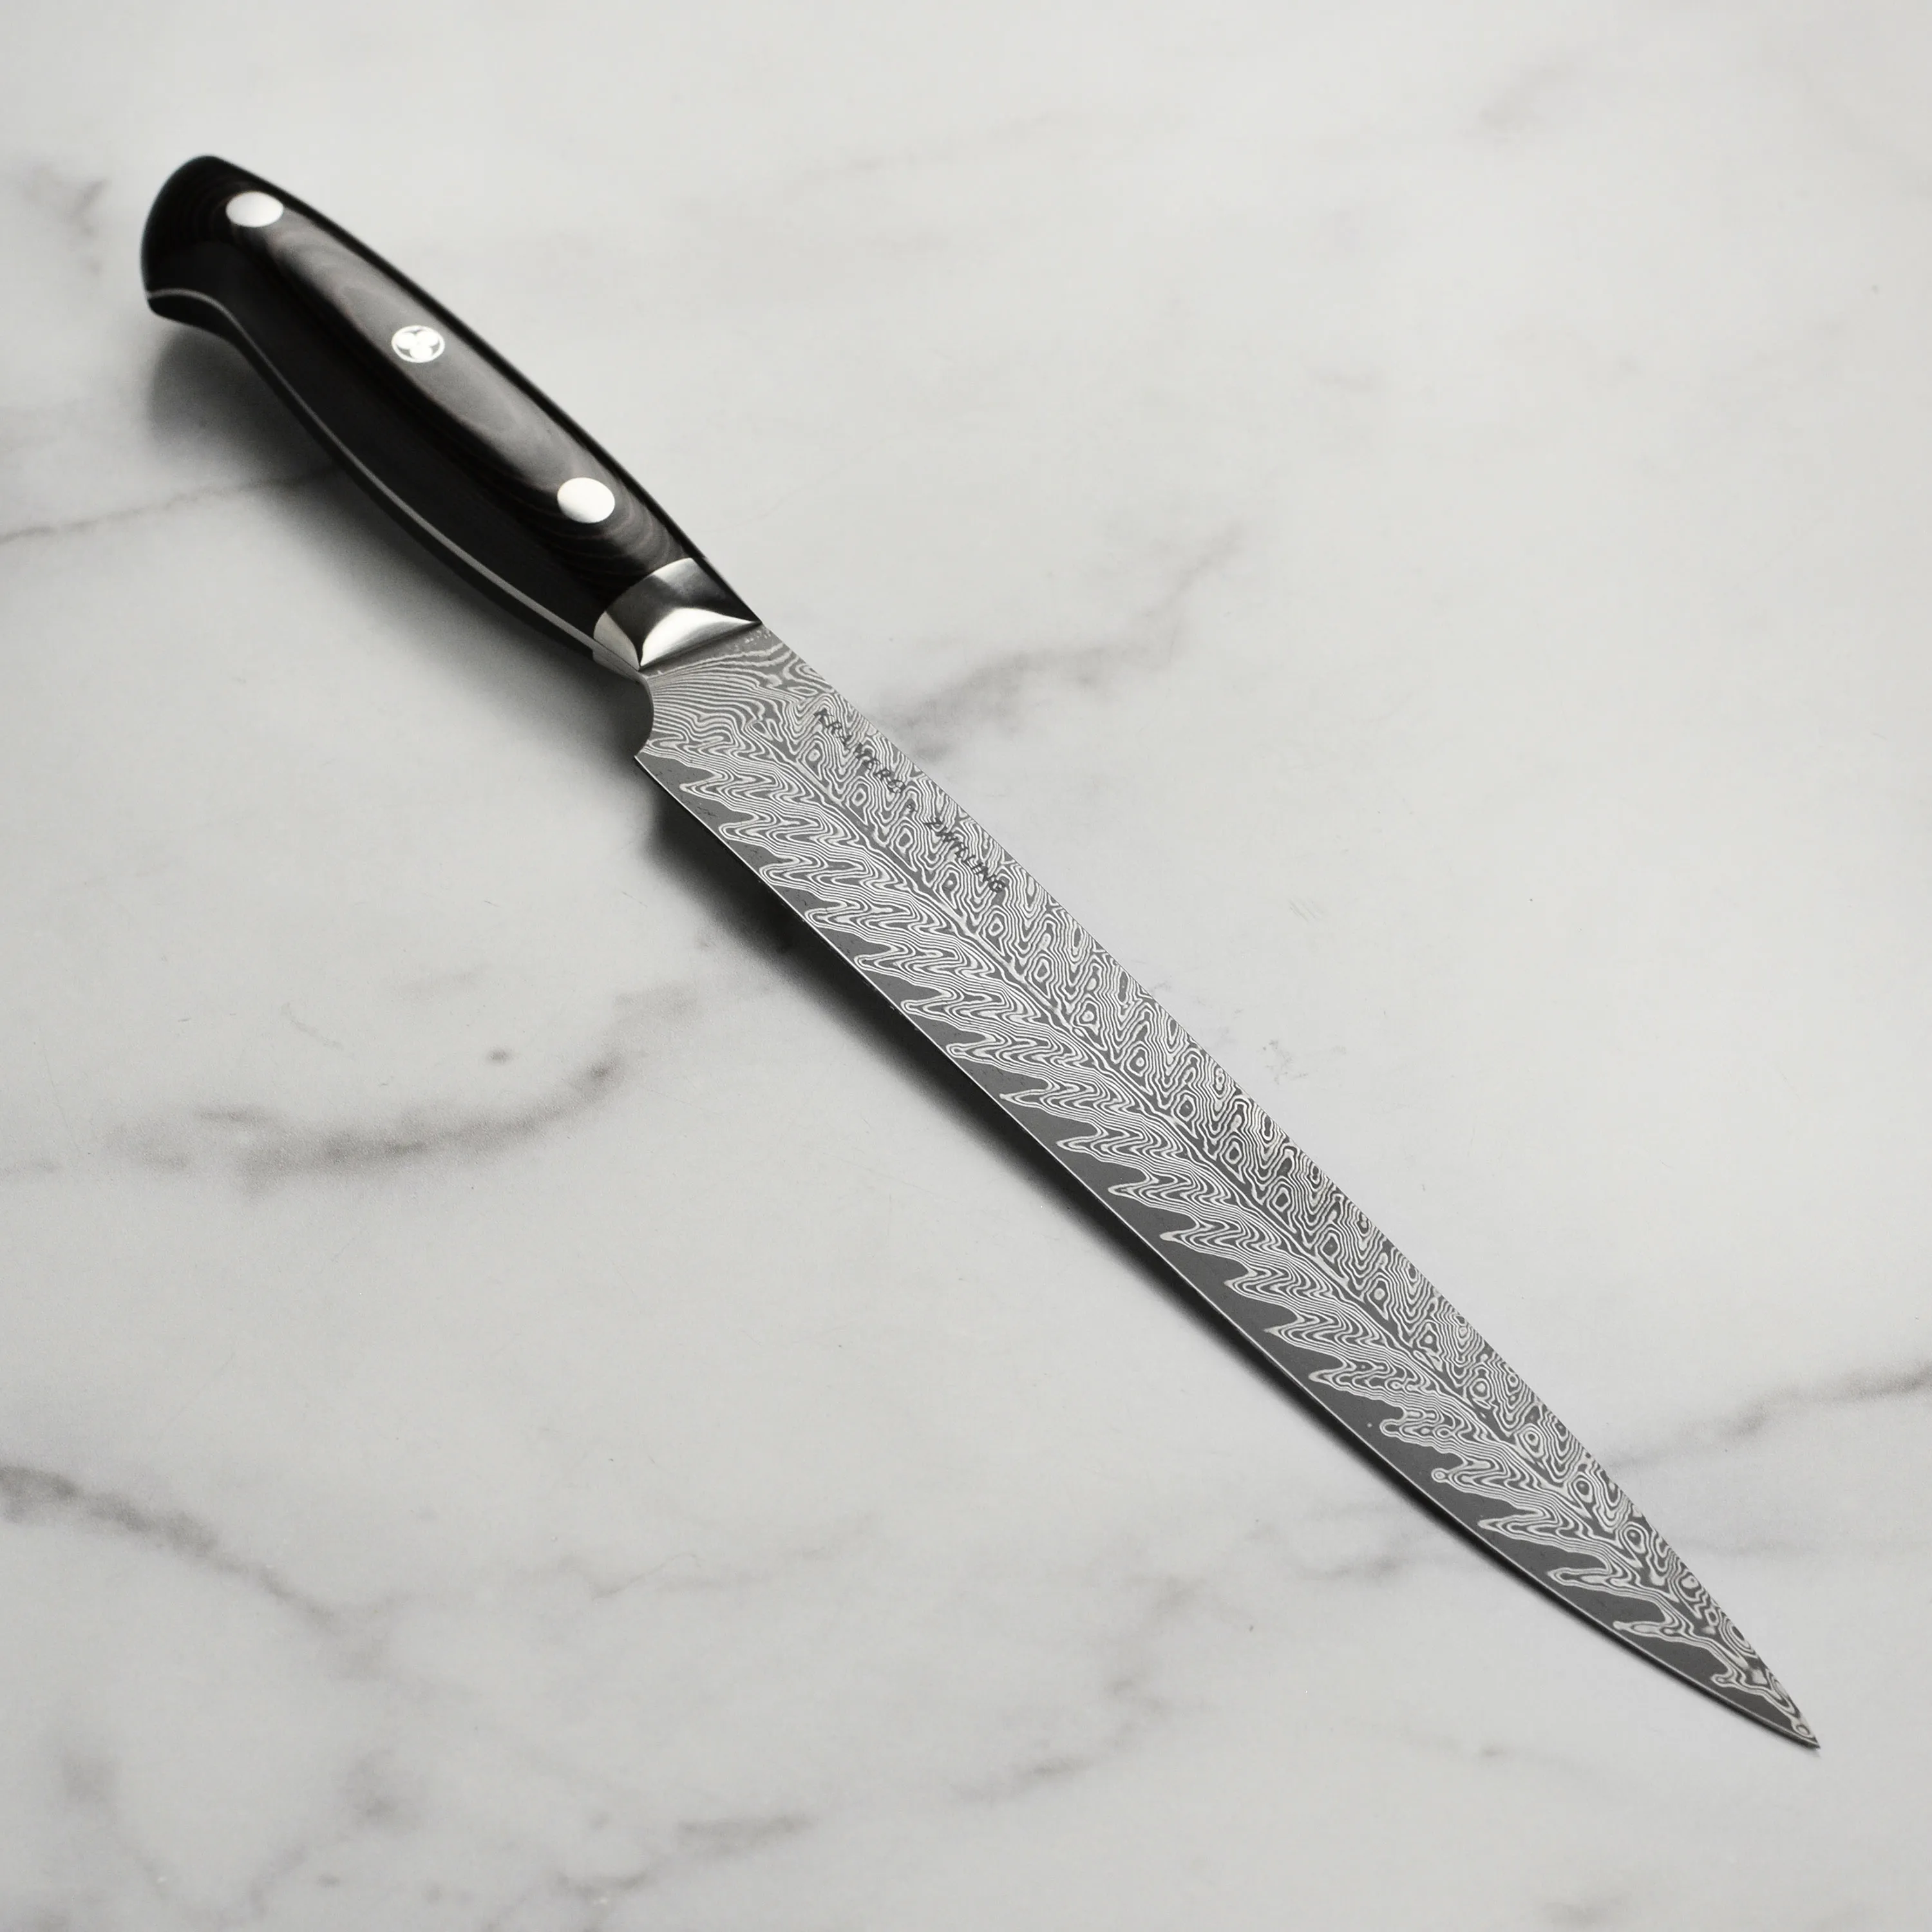 https://www.homethreads.com/files/zwilling/34890-233-kramer-by-zwilling-euroline-damascus-collection-9-inch-carving-knife-3.webp